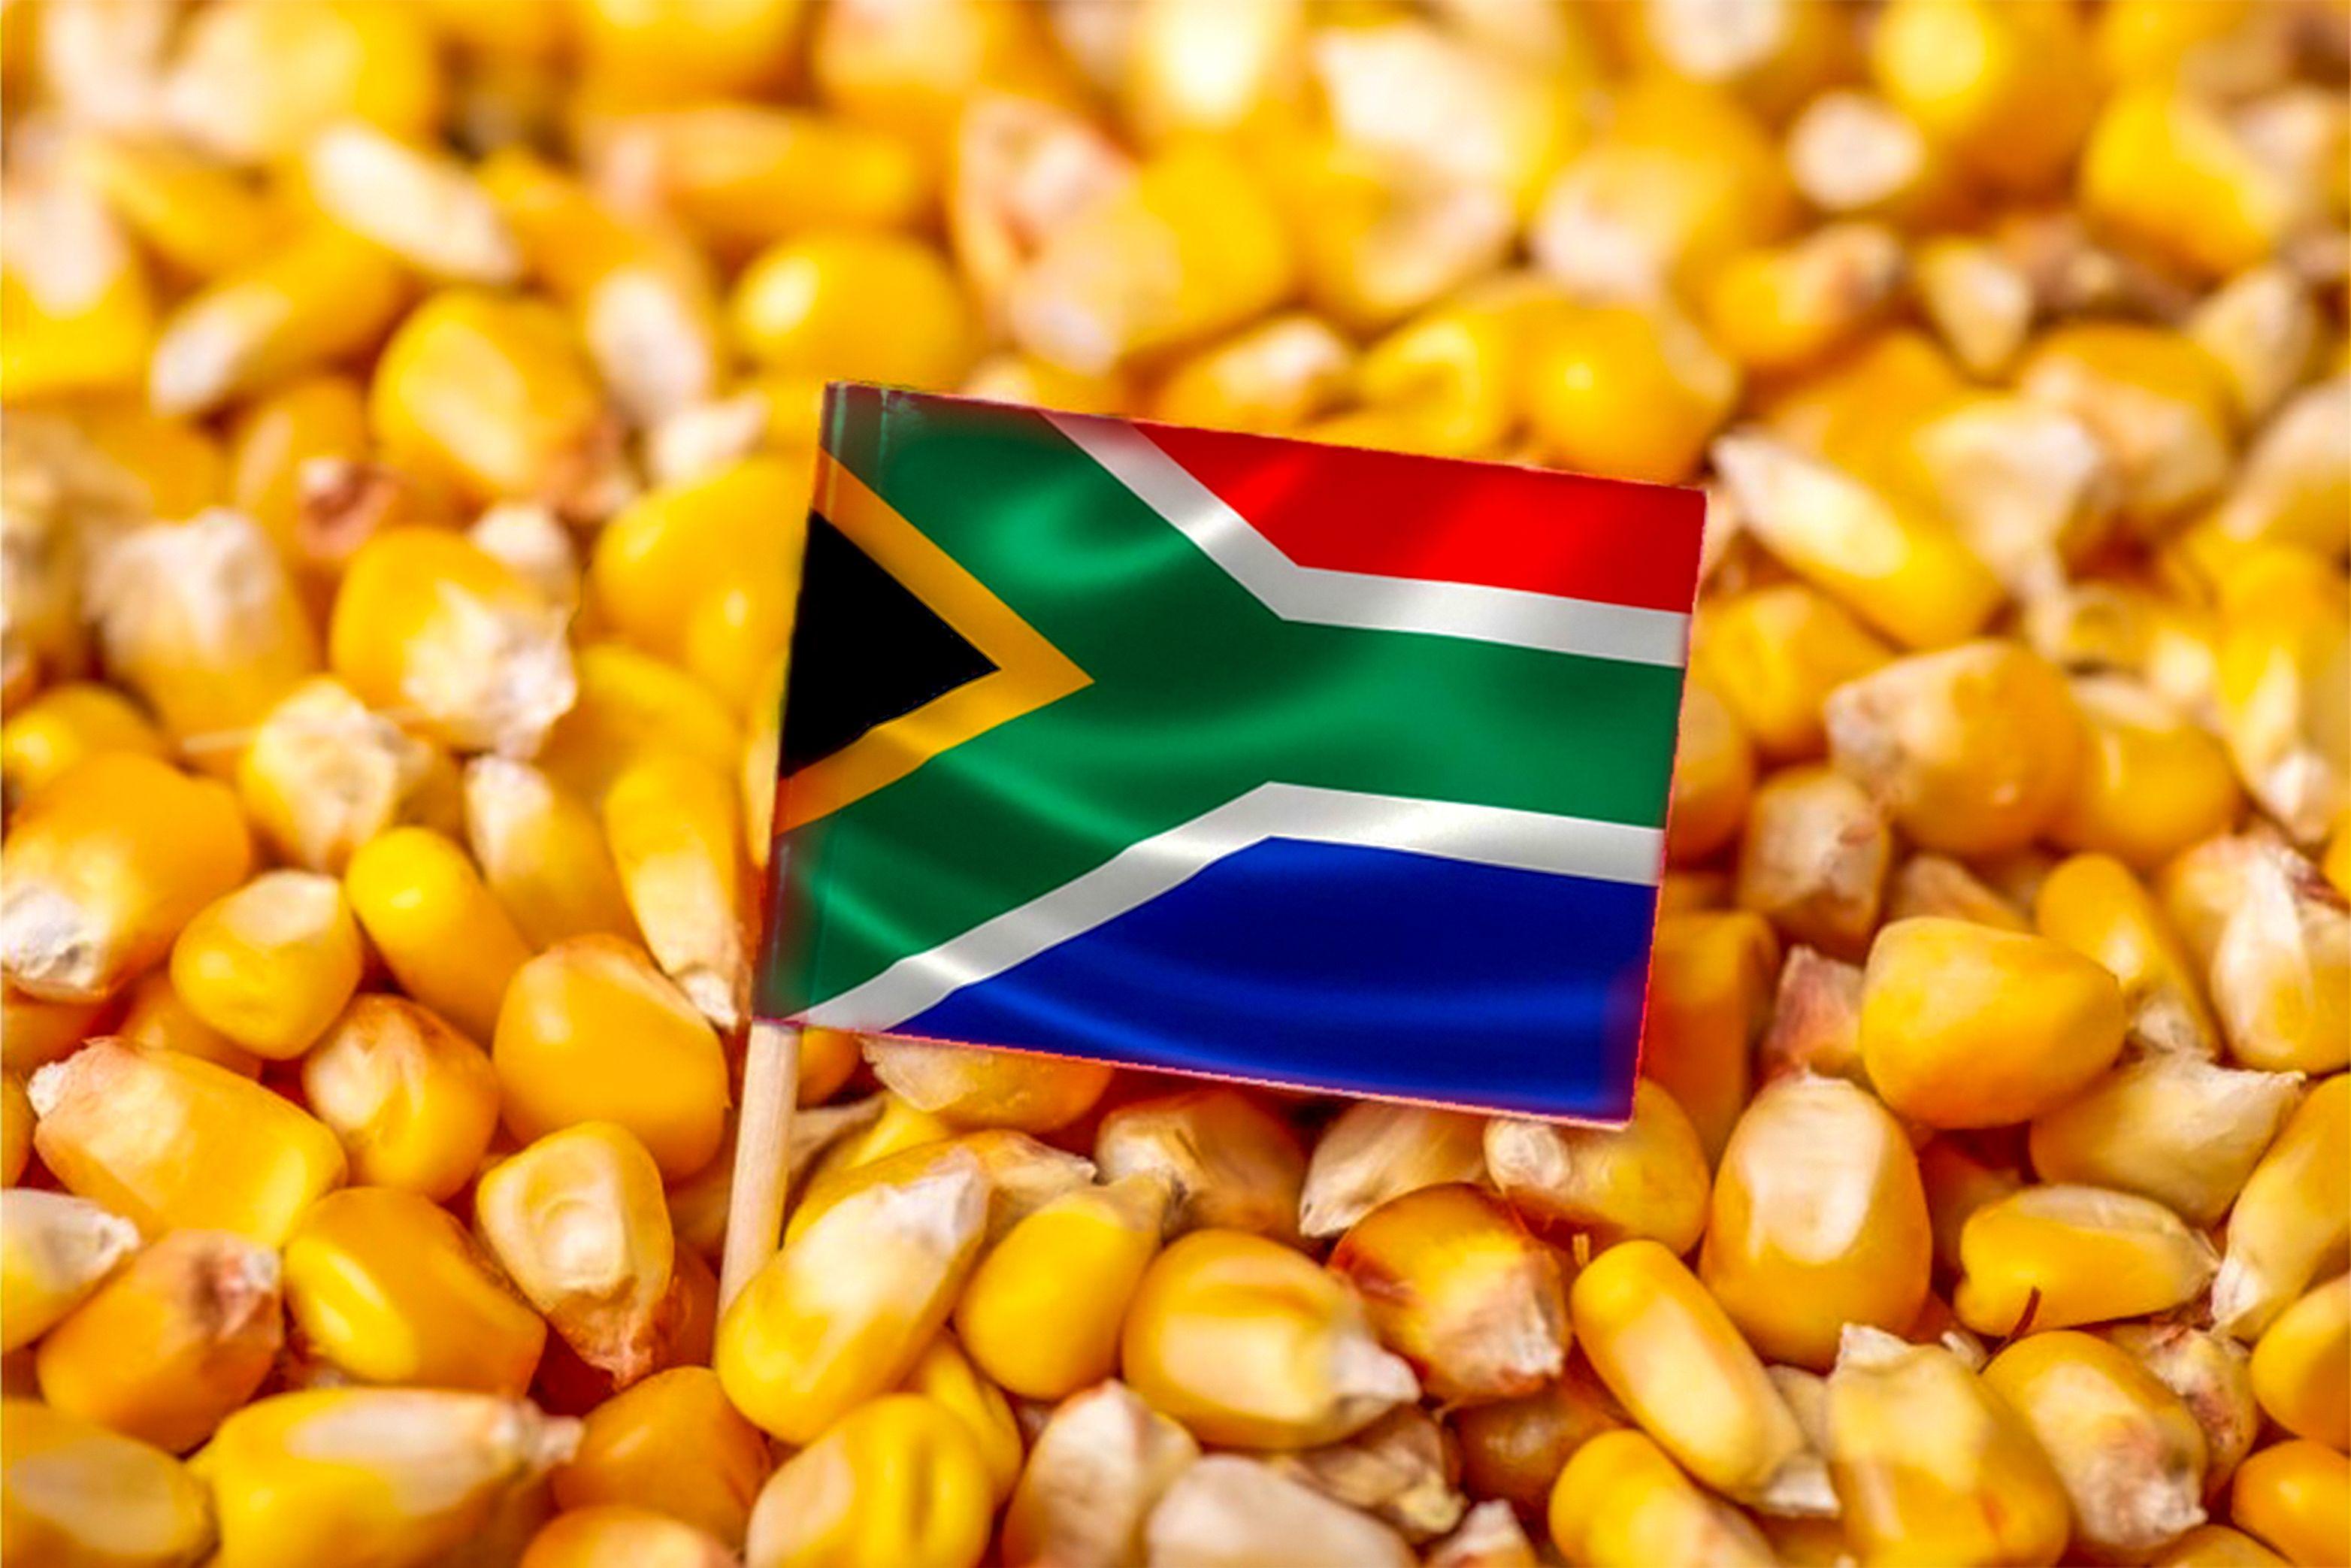 Exports to China's huge grain market, thriving industry underpin South Africa's agri exports - expert